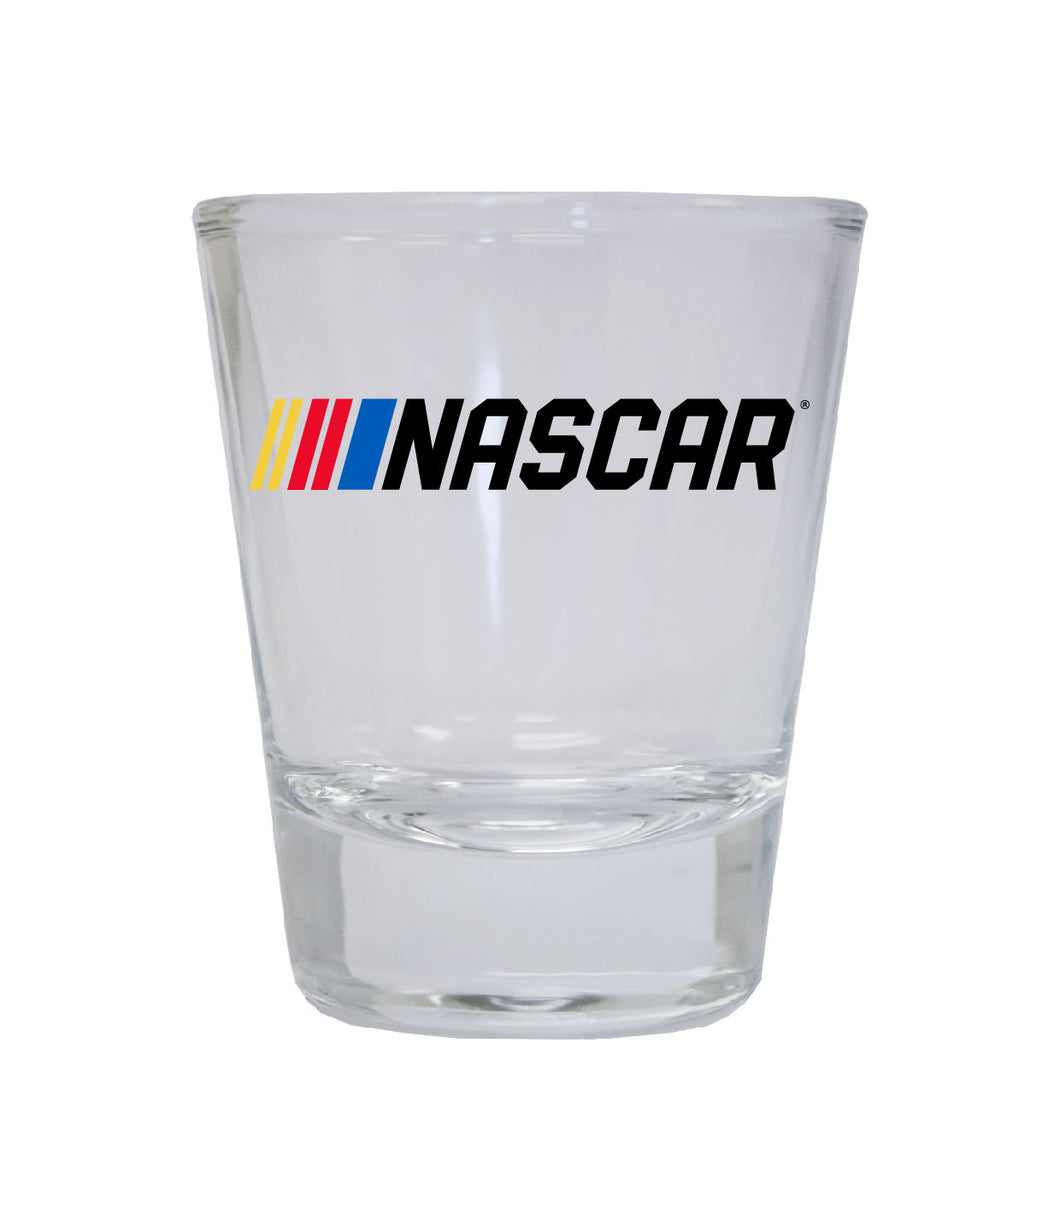 NASCAR Officially Licensed Round Shot Glass